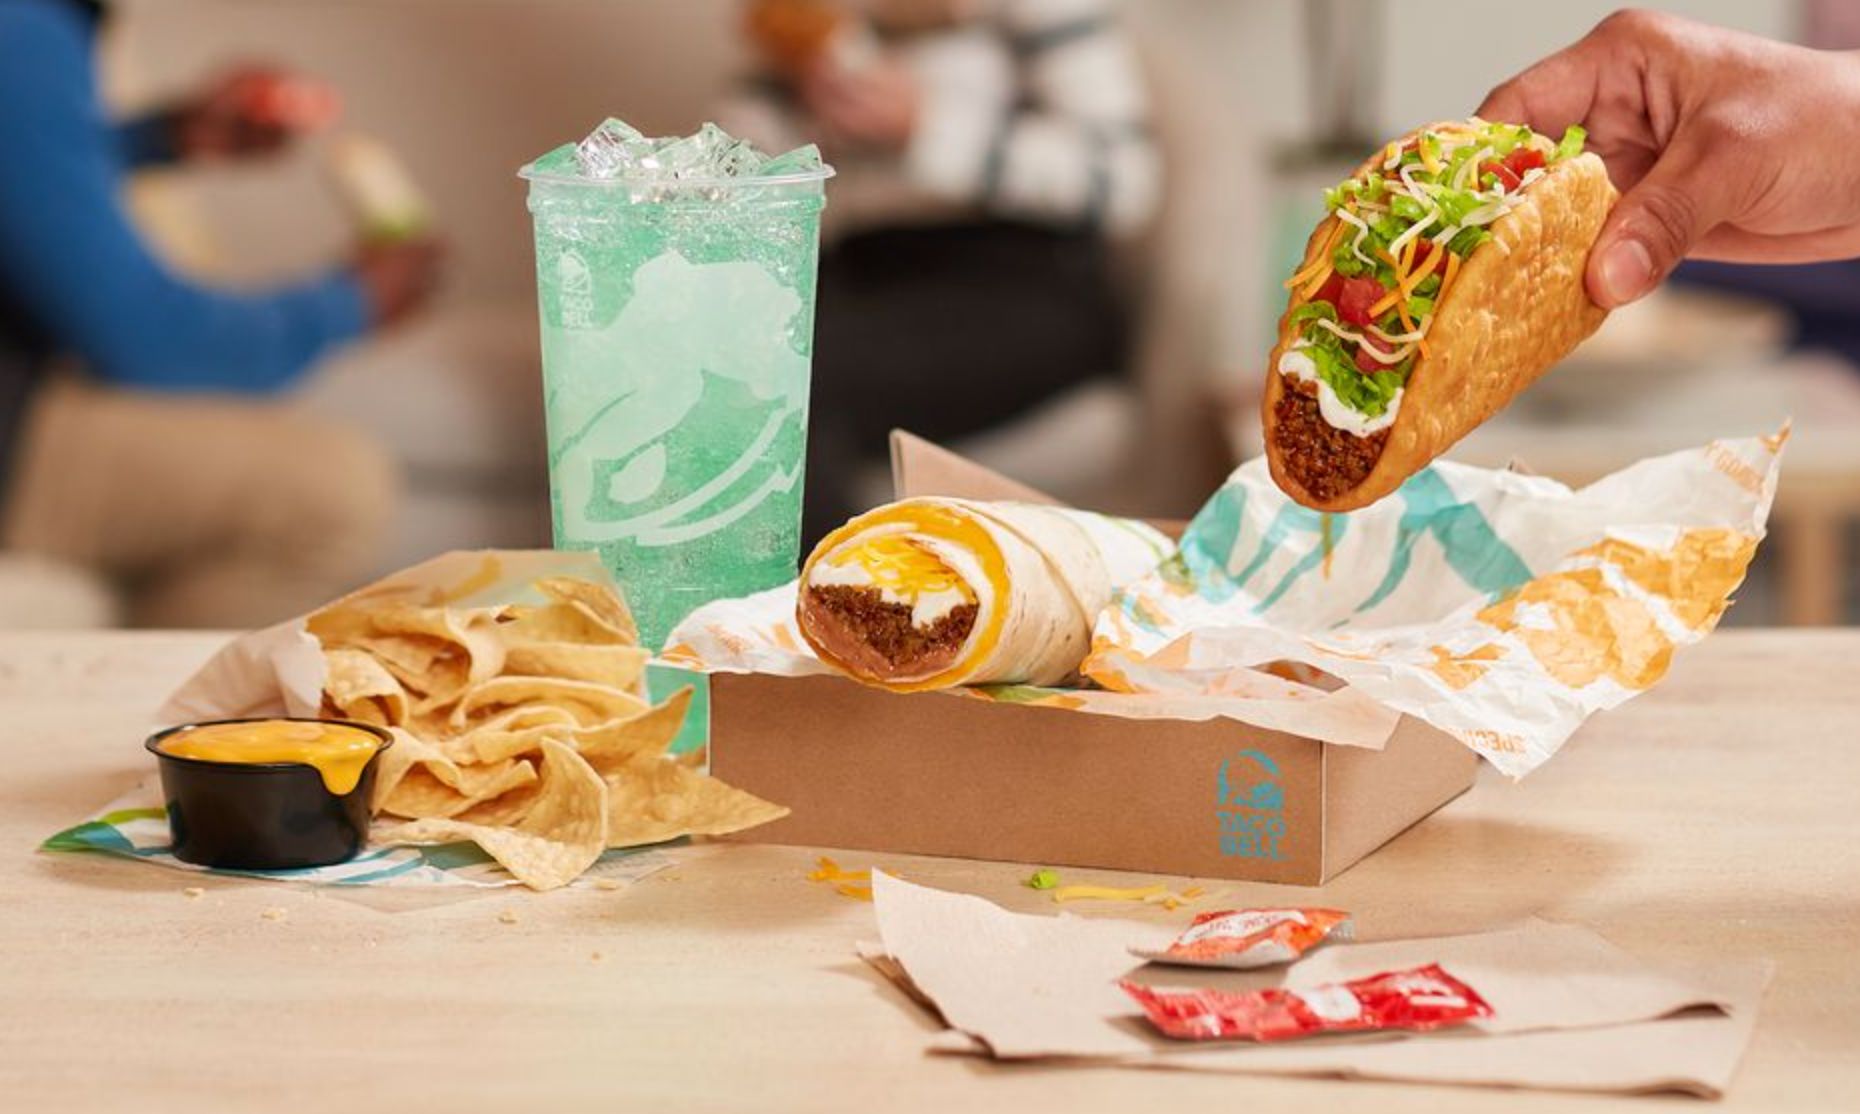 Taco Bell’s $5 Build Your Own Cravings Box Deal!